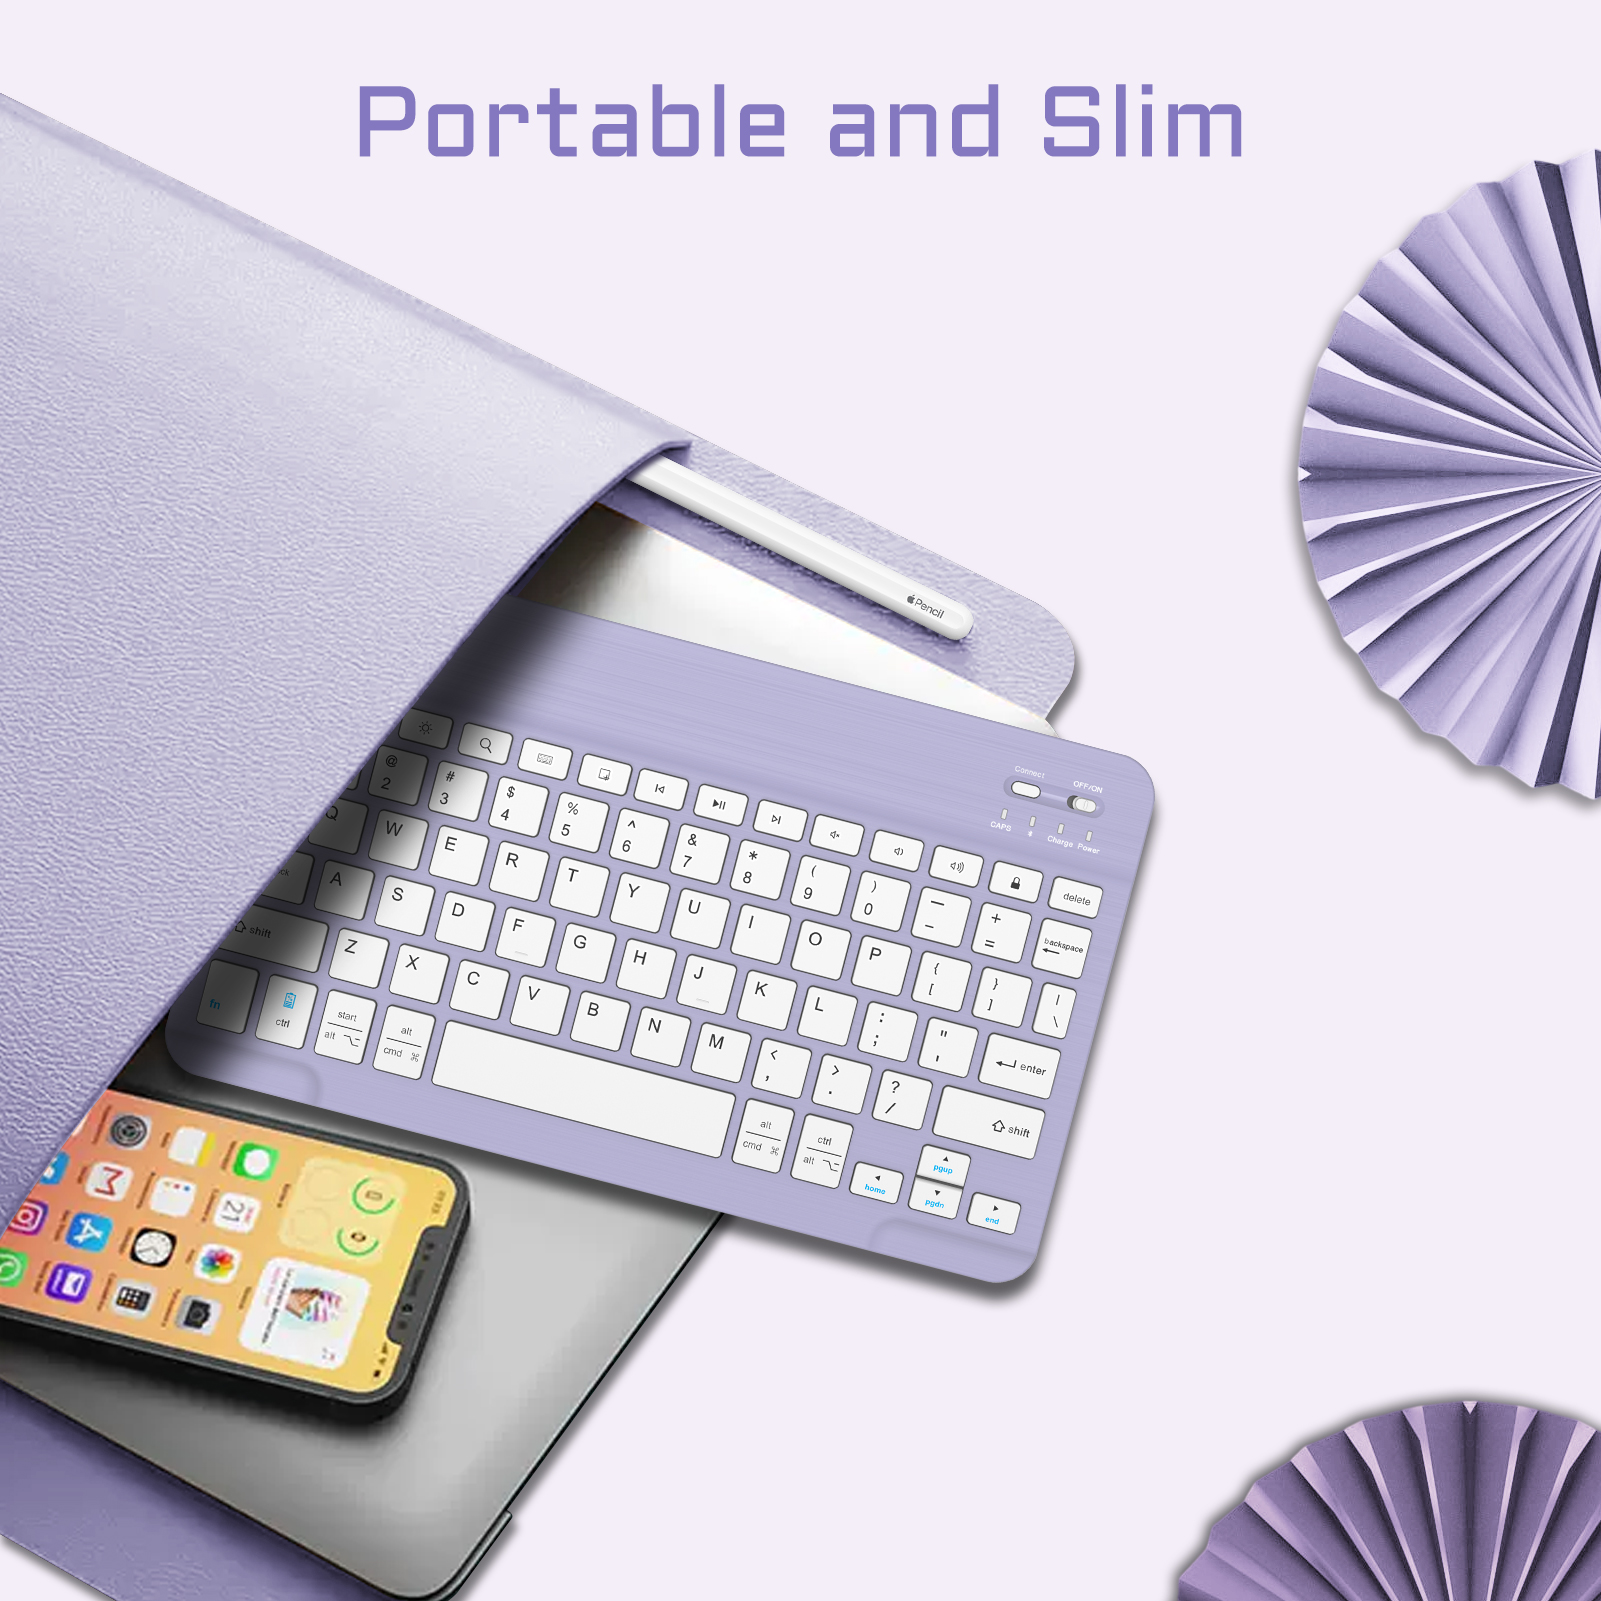 Fintie 10-Inch Ultrathin (4mm) Wireless Bluetooth Keyboard for iPad Samsung Tablet, iPhone Smartphone, iOS, Android Tablets Phone, Lavender - image 3 of 8